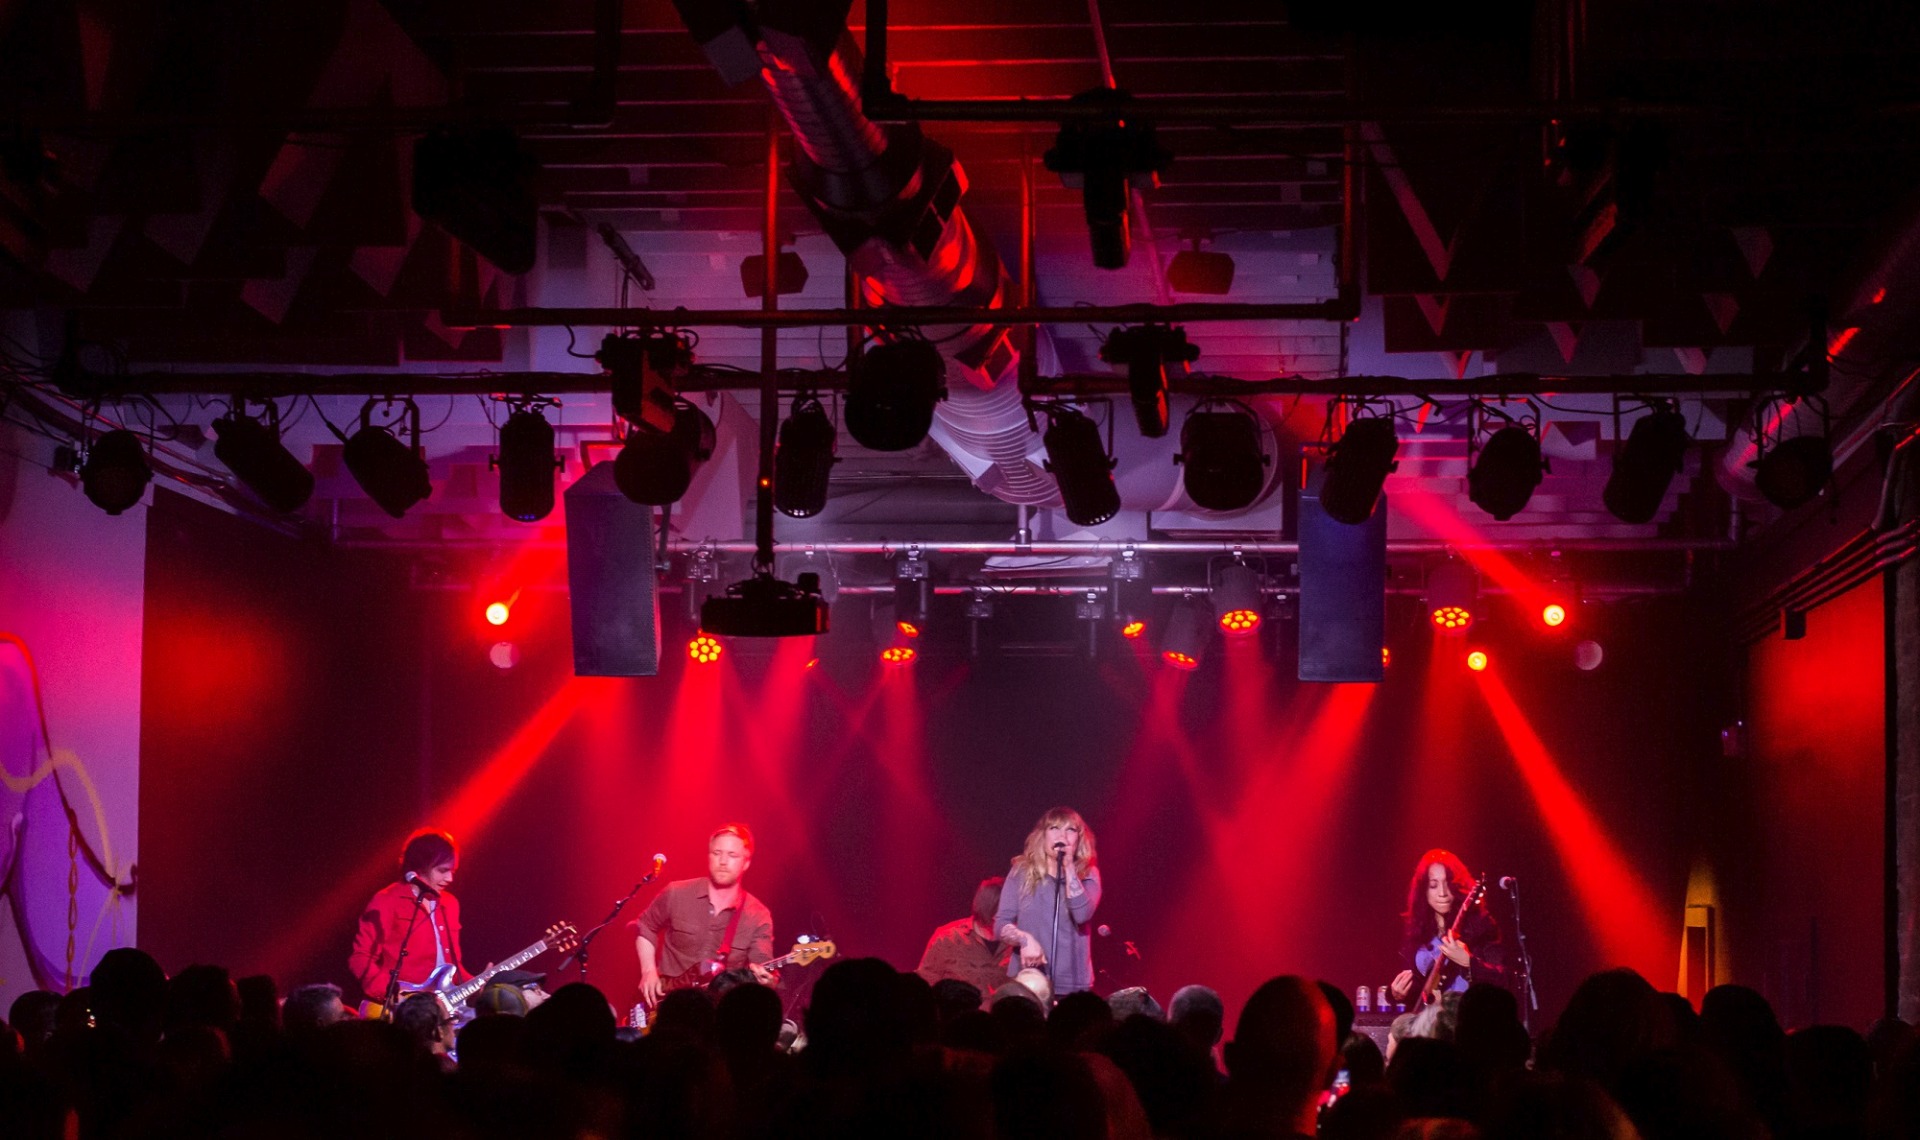 Detroit’s El Club Features Eclectic Music with Elation Lighting Rig to Match Gallery Image el club detroit 3 